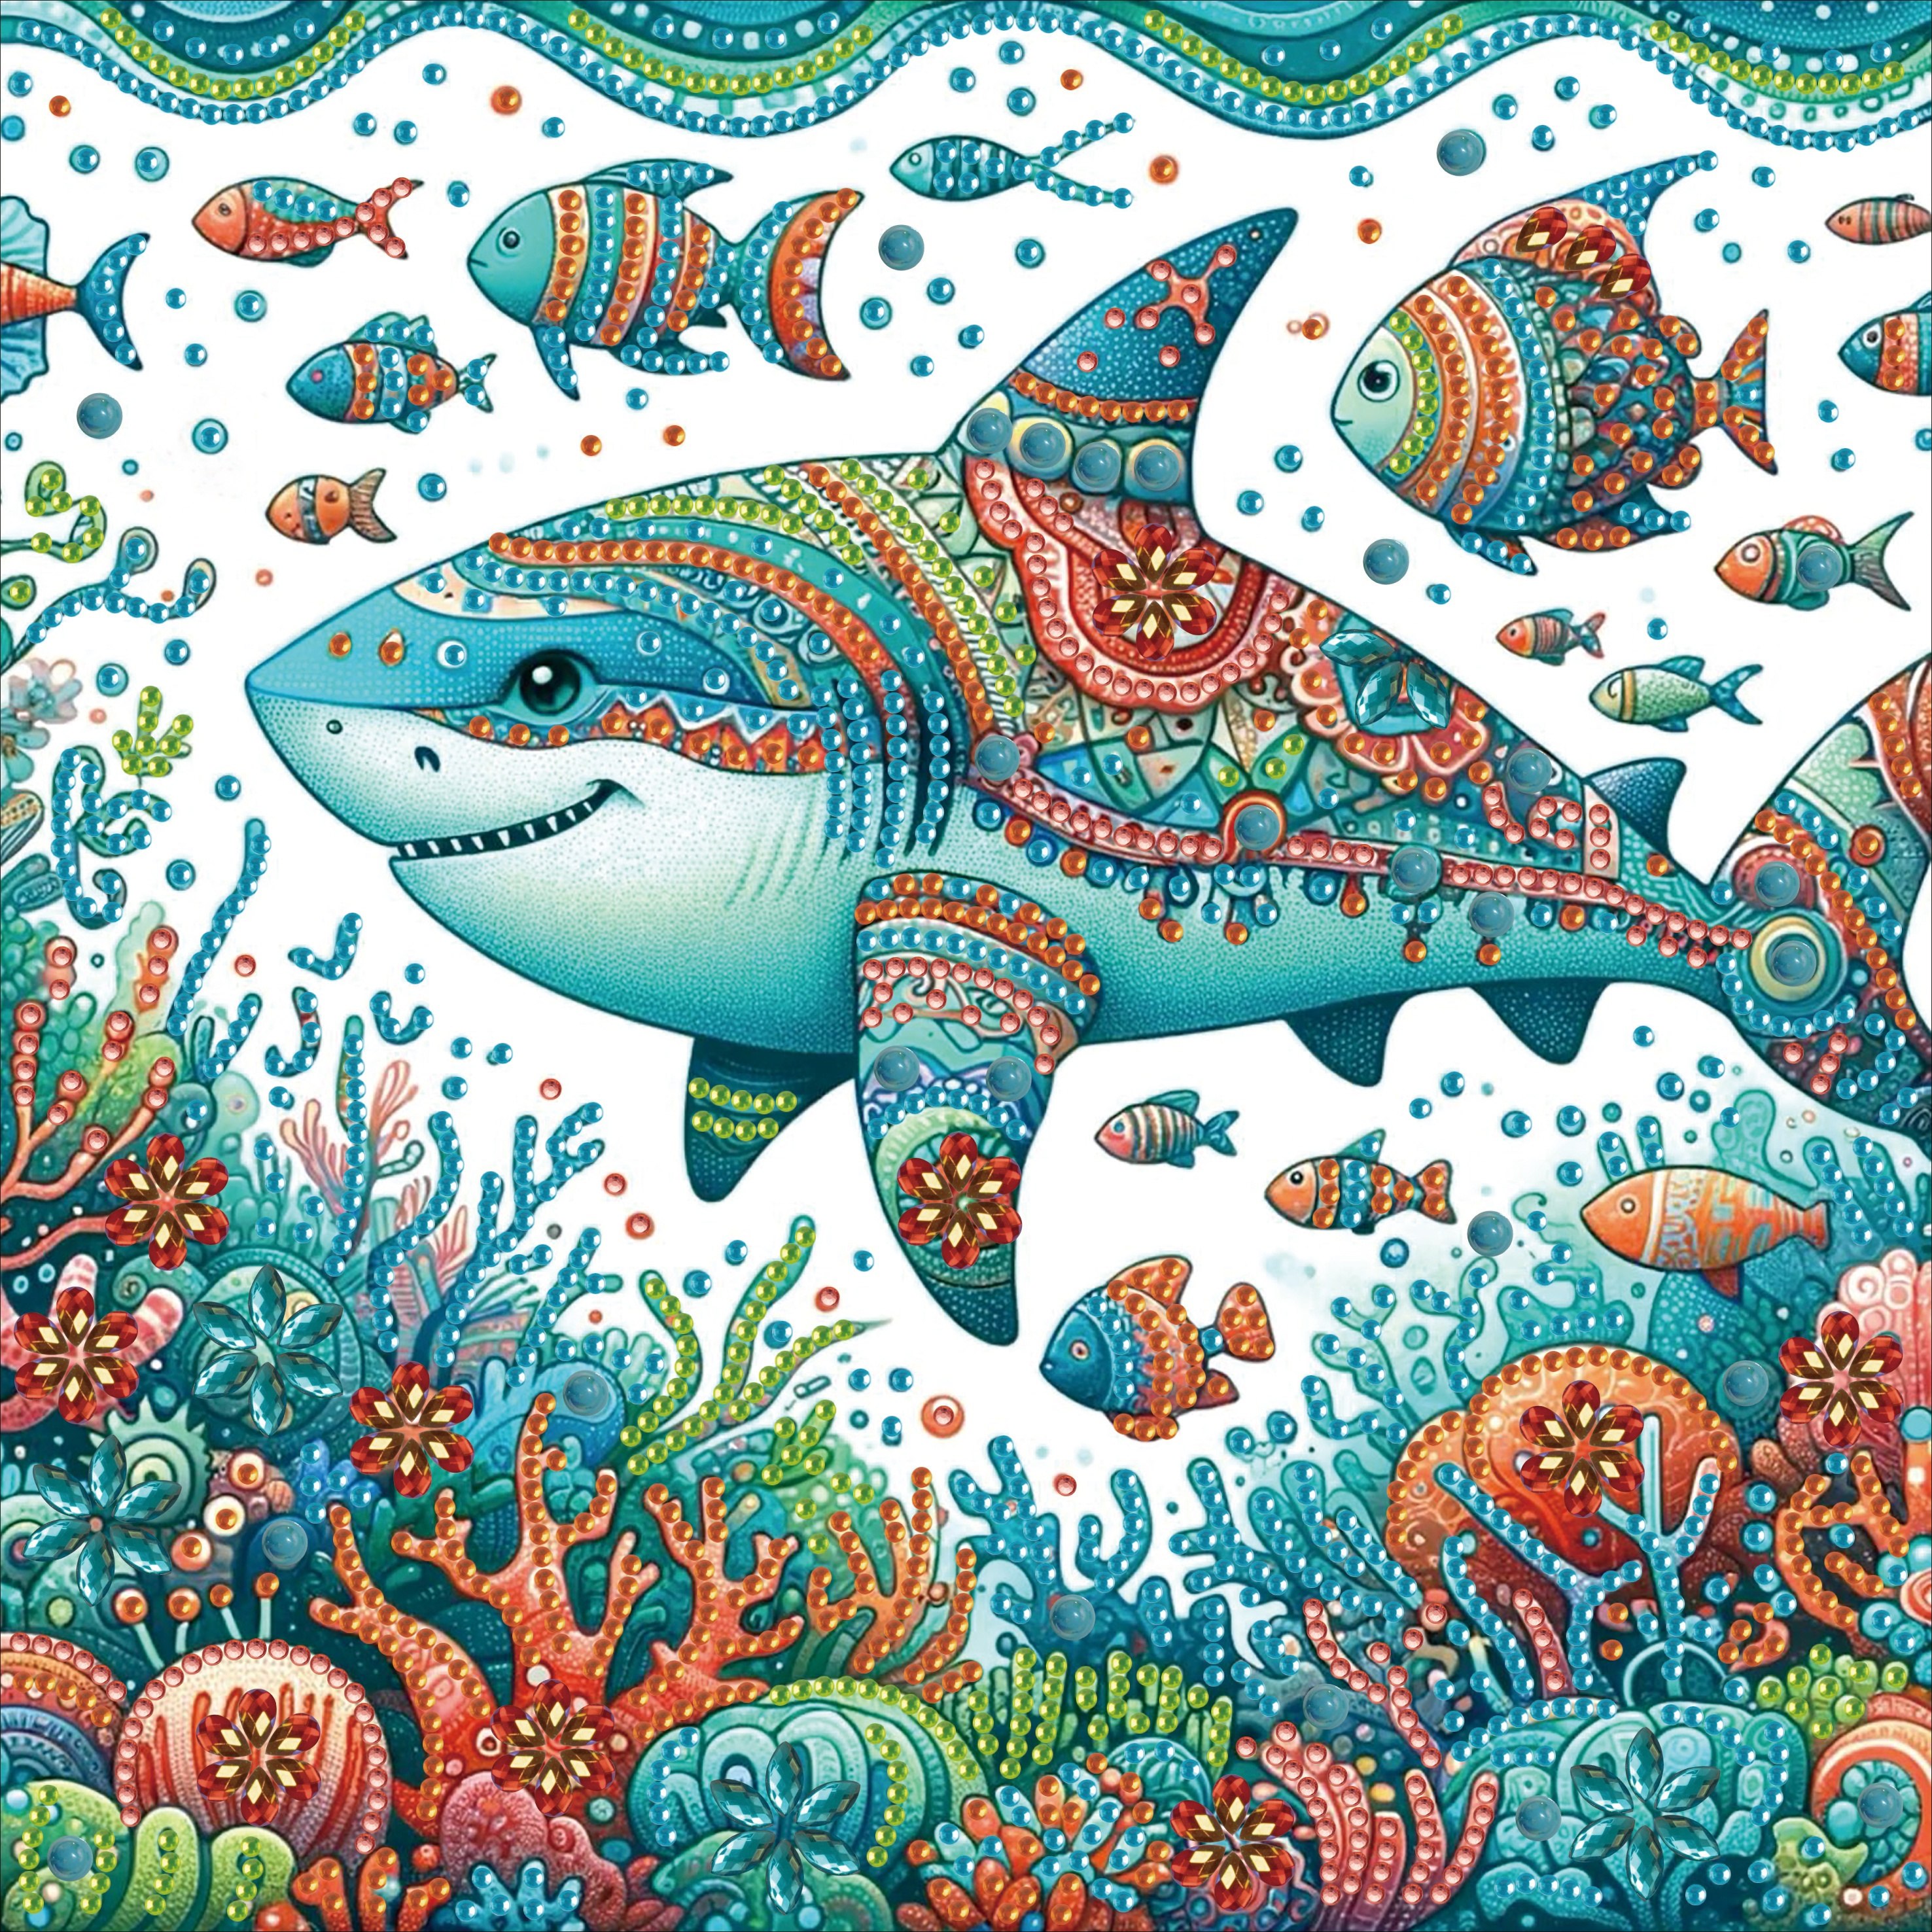 

Shark & Coral Ocean 5d Diamond Painting Kit - Diy Special Shaped Crystal Art, Canvas Mosaic Craft With Hanging Chain For Home & Garden Decor, Unique Handmade Gift Idea